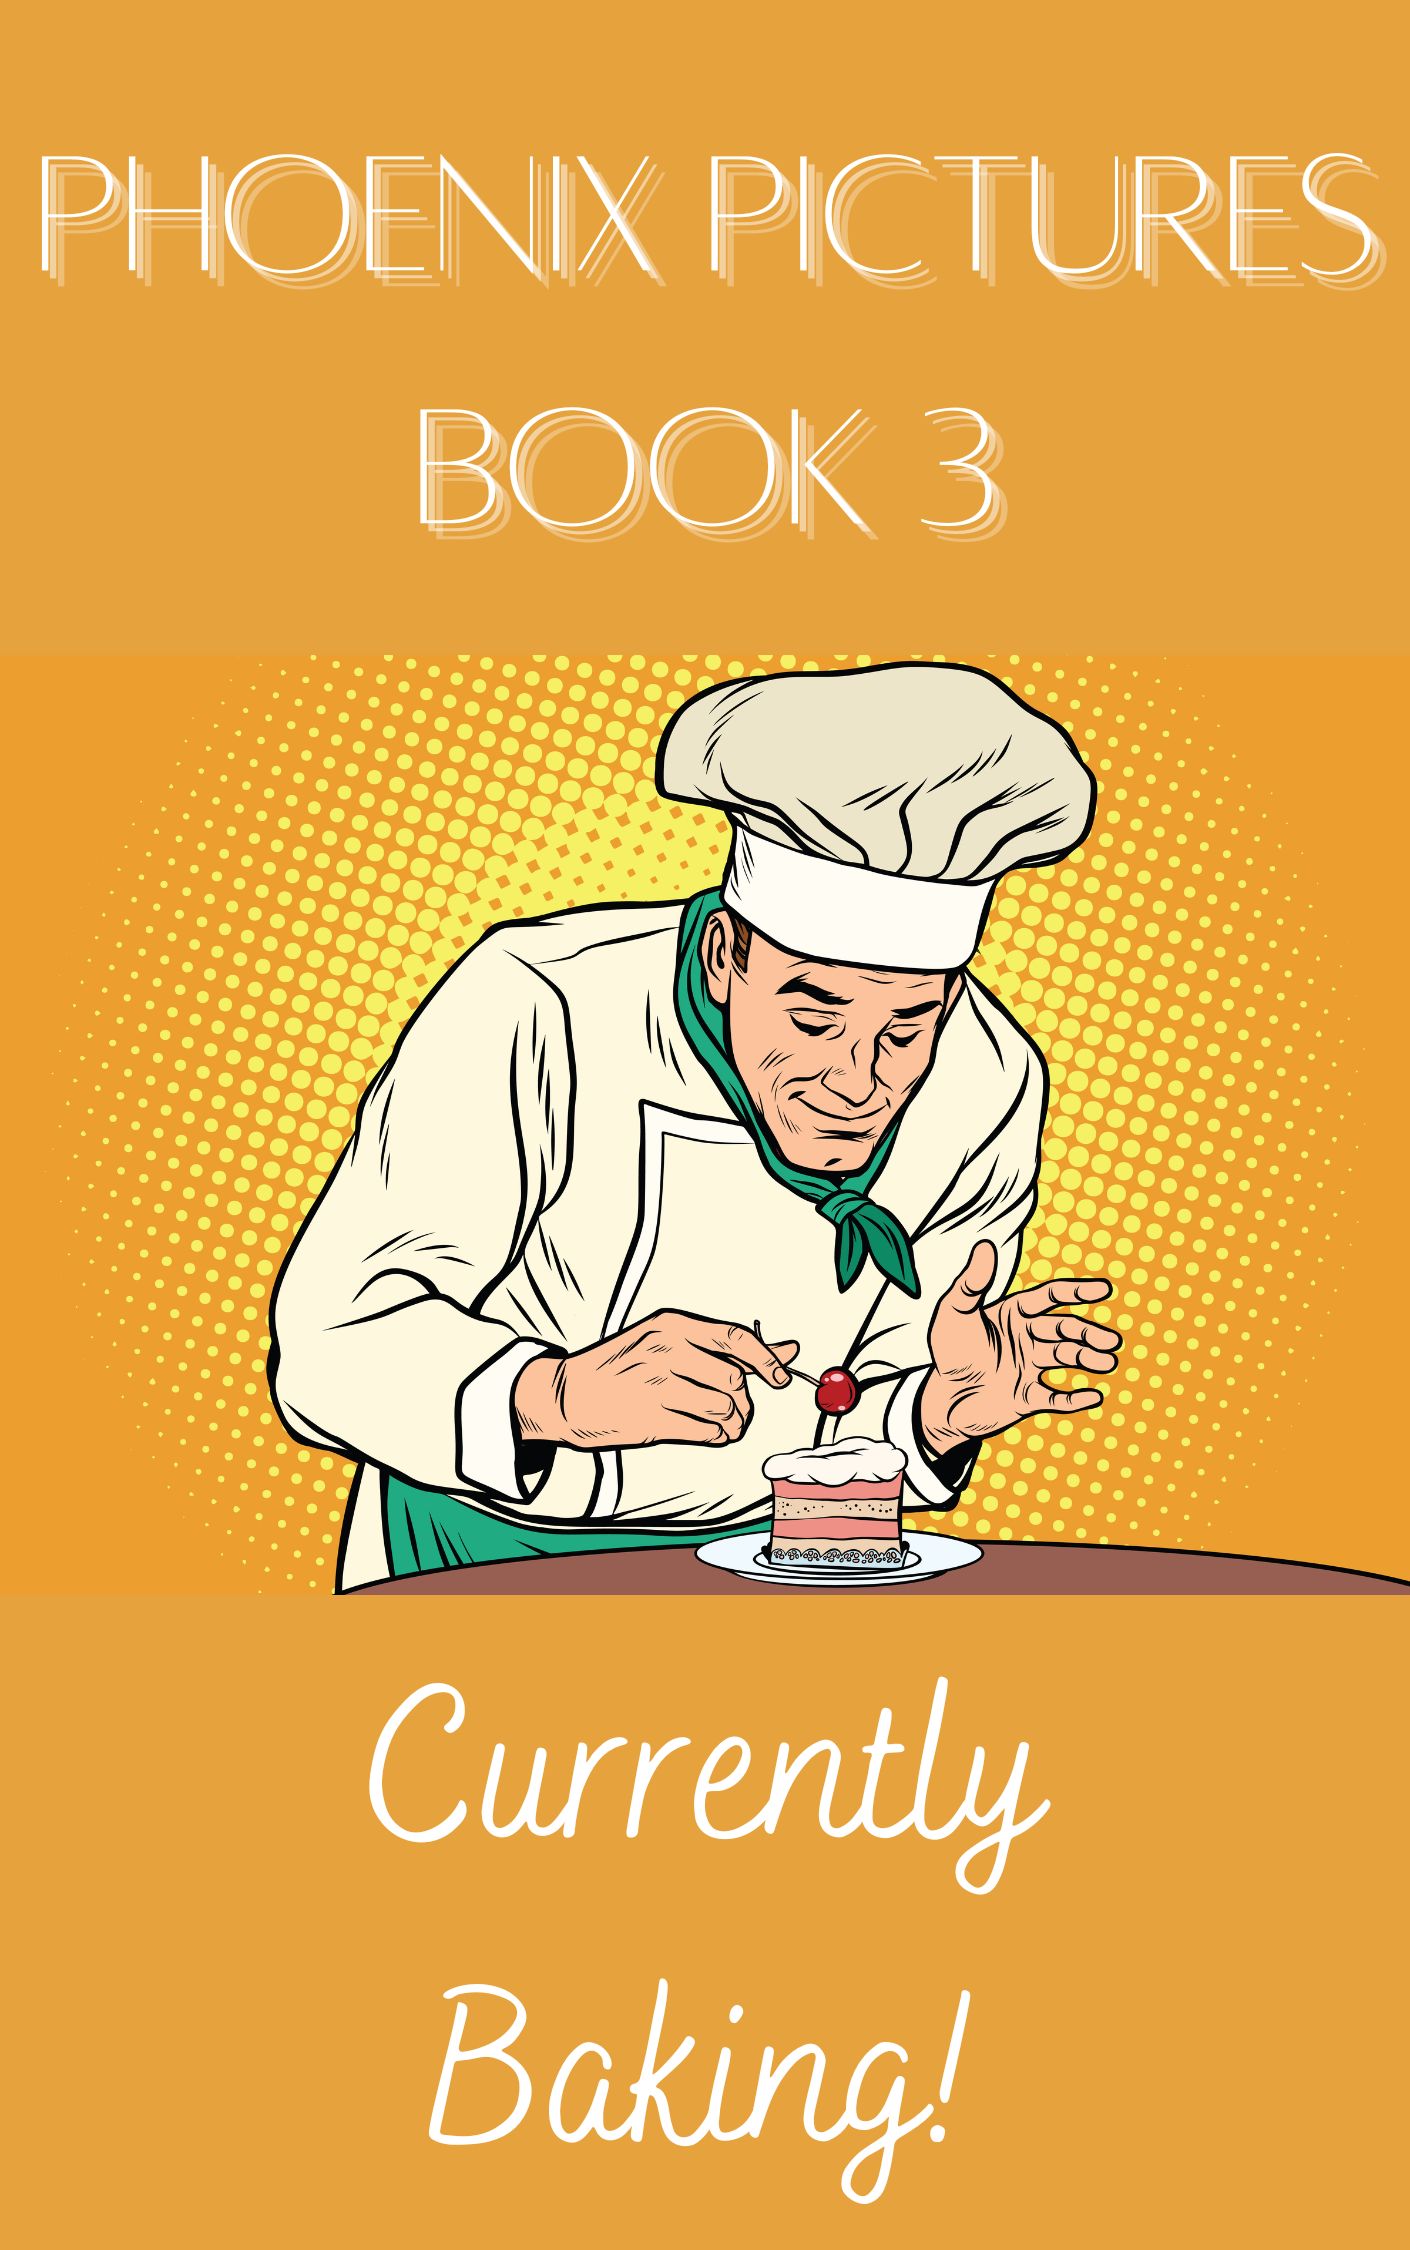 Pop-art style illustration of a white man in a chef uniform, putting the finishing touches on a small cake, against an orange background. The caption reads "Phoenix Pictures Book 3 - Currently Baking!"